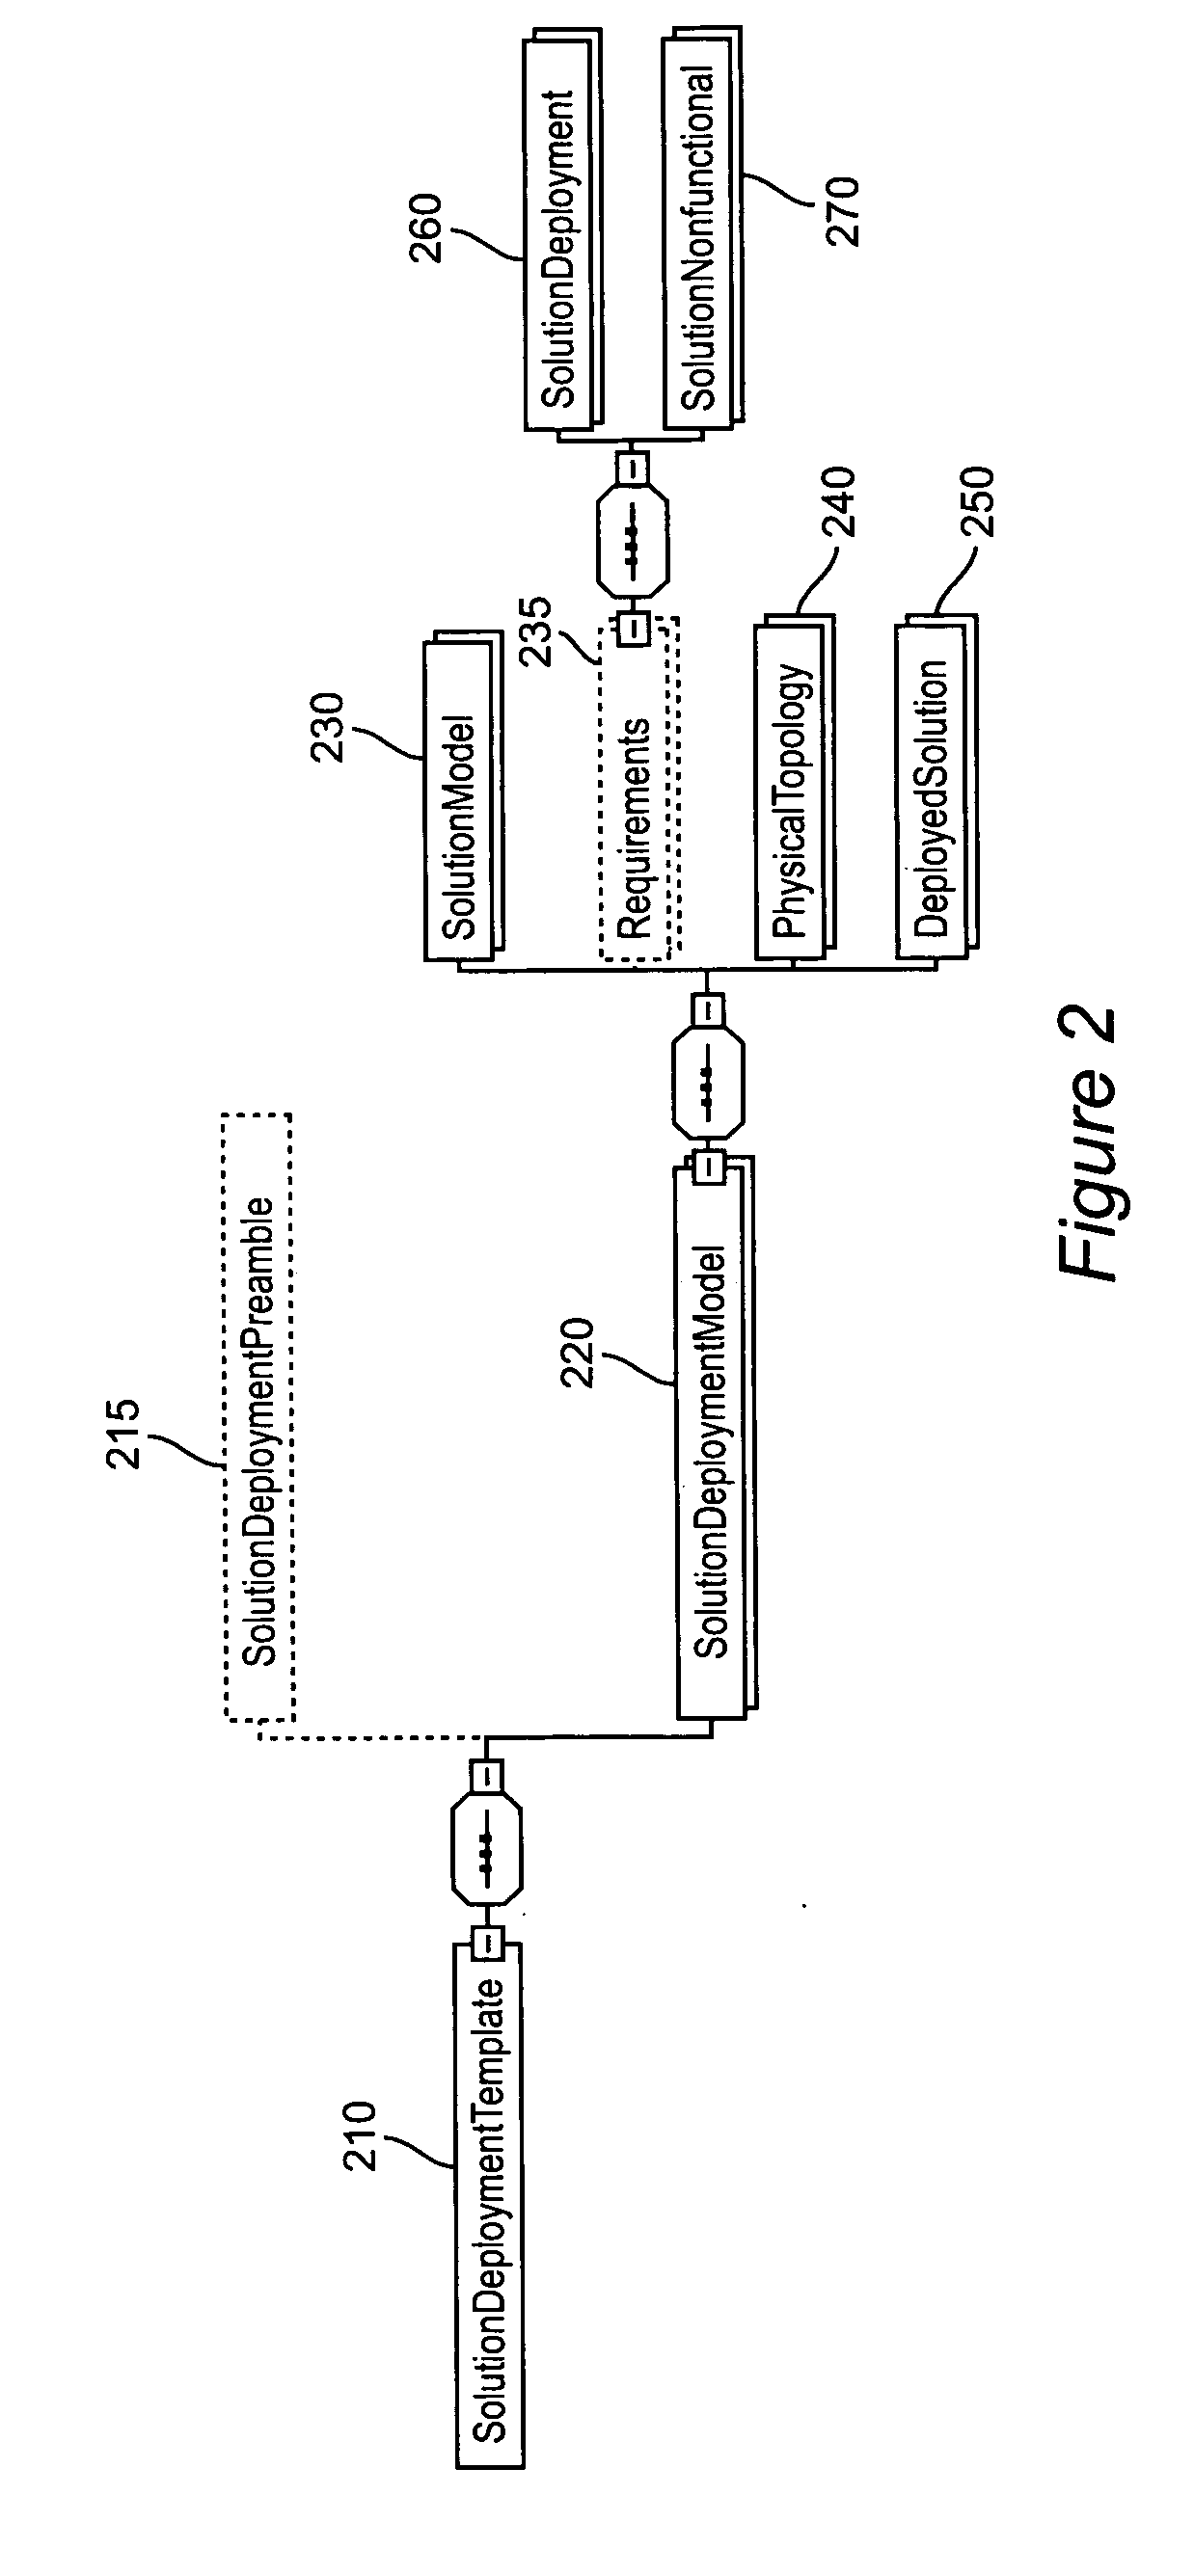 Method and apparatus for solution-template based deployment and management of an integration solution